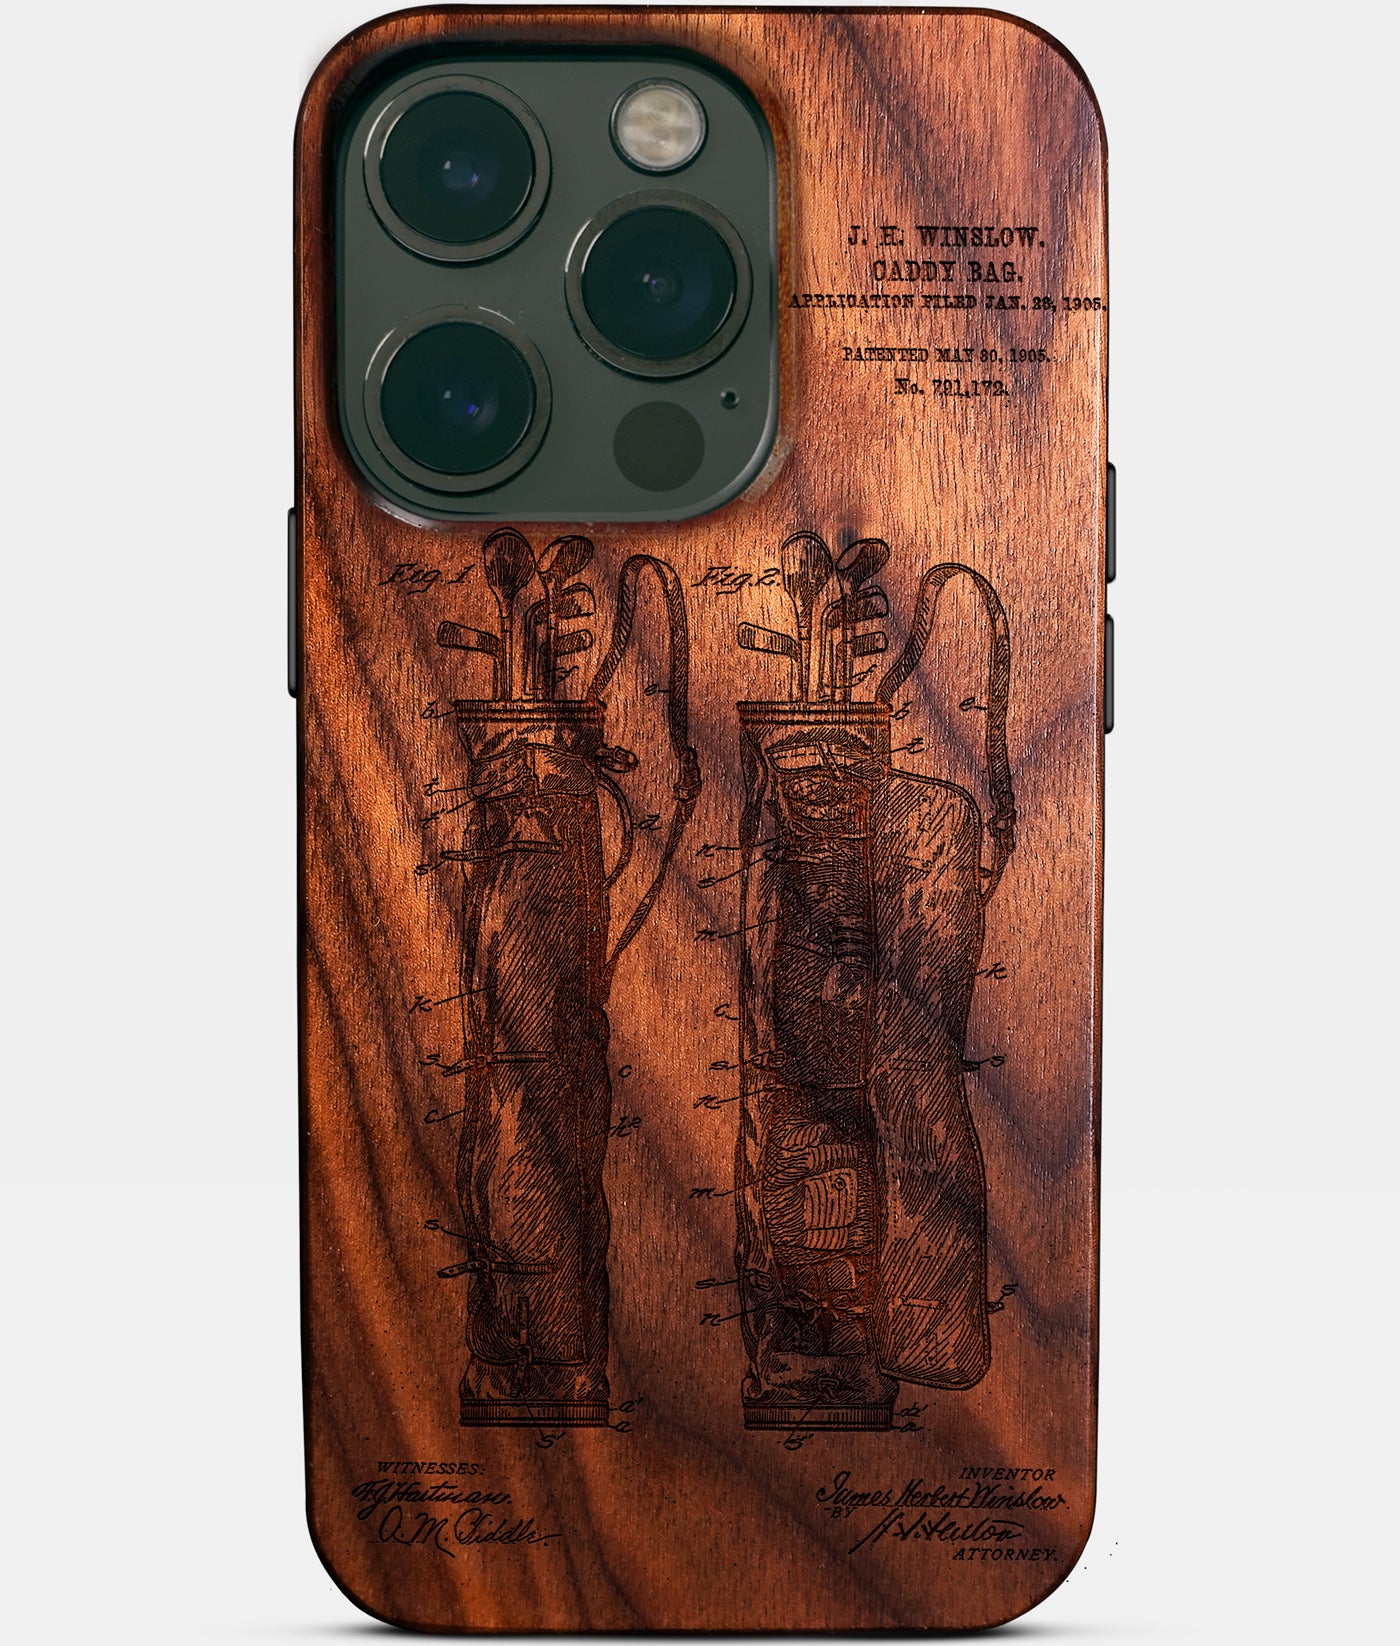 Custom Golf iPhone 14 Pro Cases Golf Bag Personalized Golf Gifts For Men 2022 Best Golf Christmas Gifts Best Country Club Gifts Carved Wood Unusual Golf Gift For Him Monogrammed iPhone 14 Pro Covers